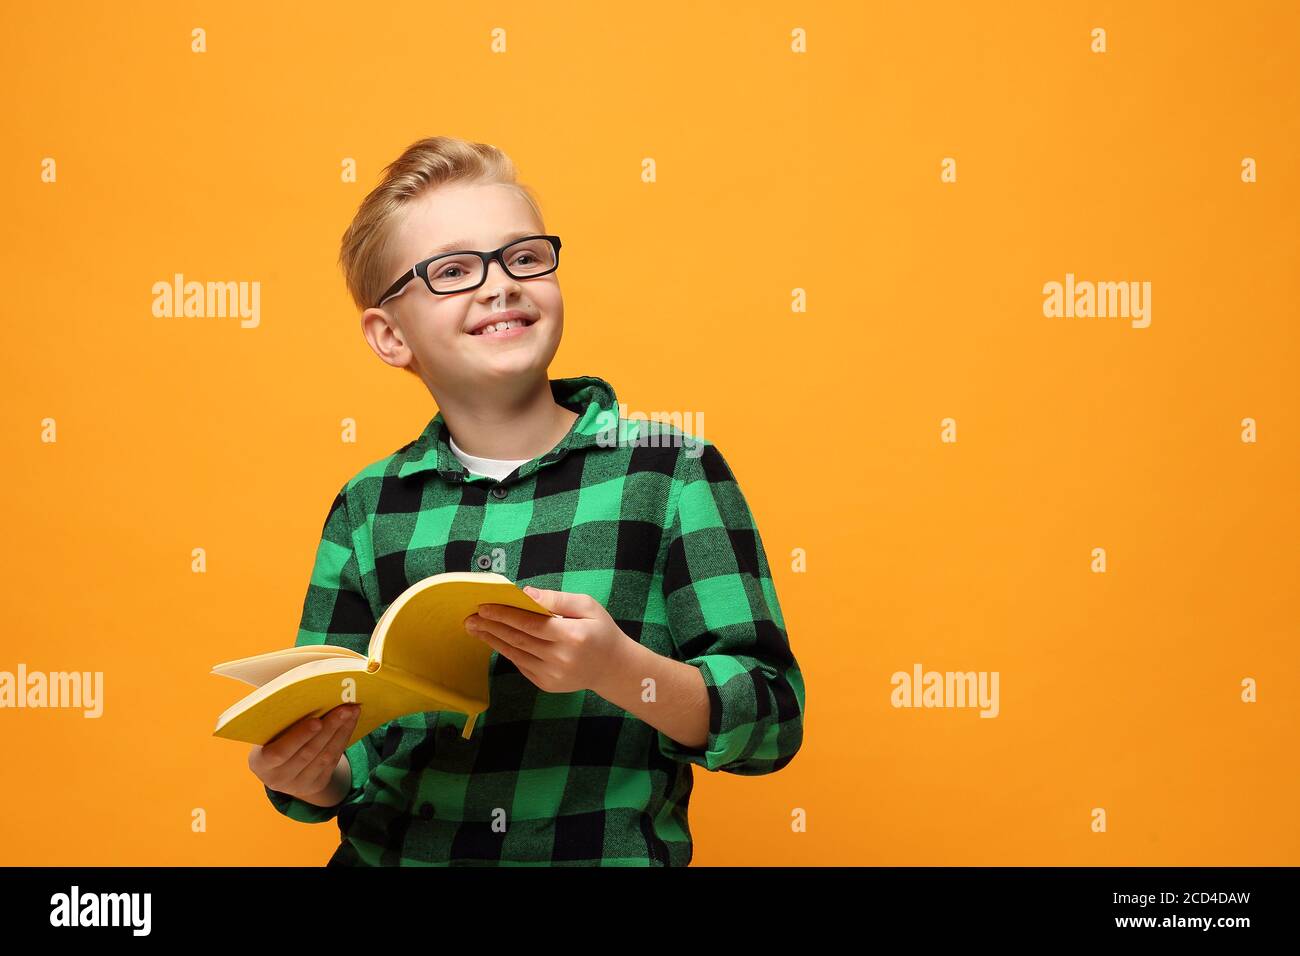 Book reading. Smiling, happy boy reading a book. Portrait of a child on a colored yellow background. Stock Photo